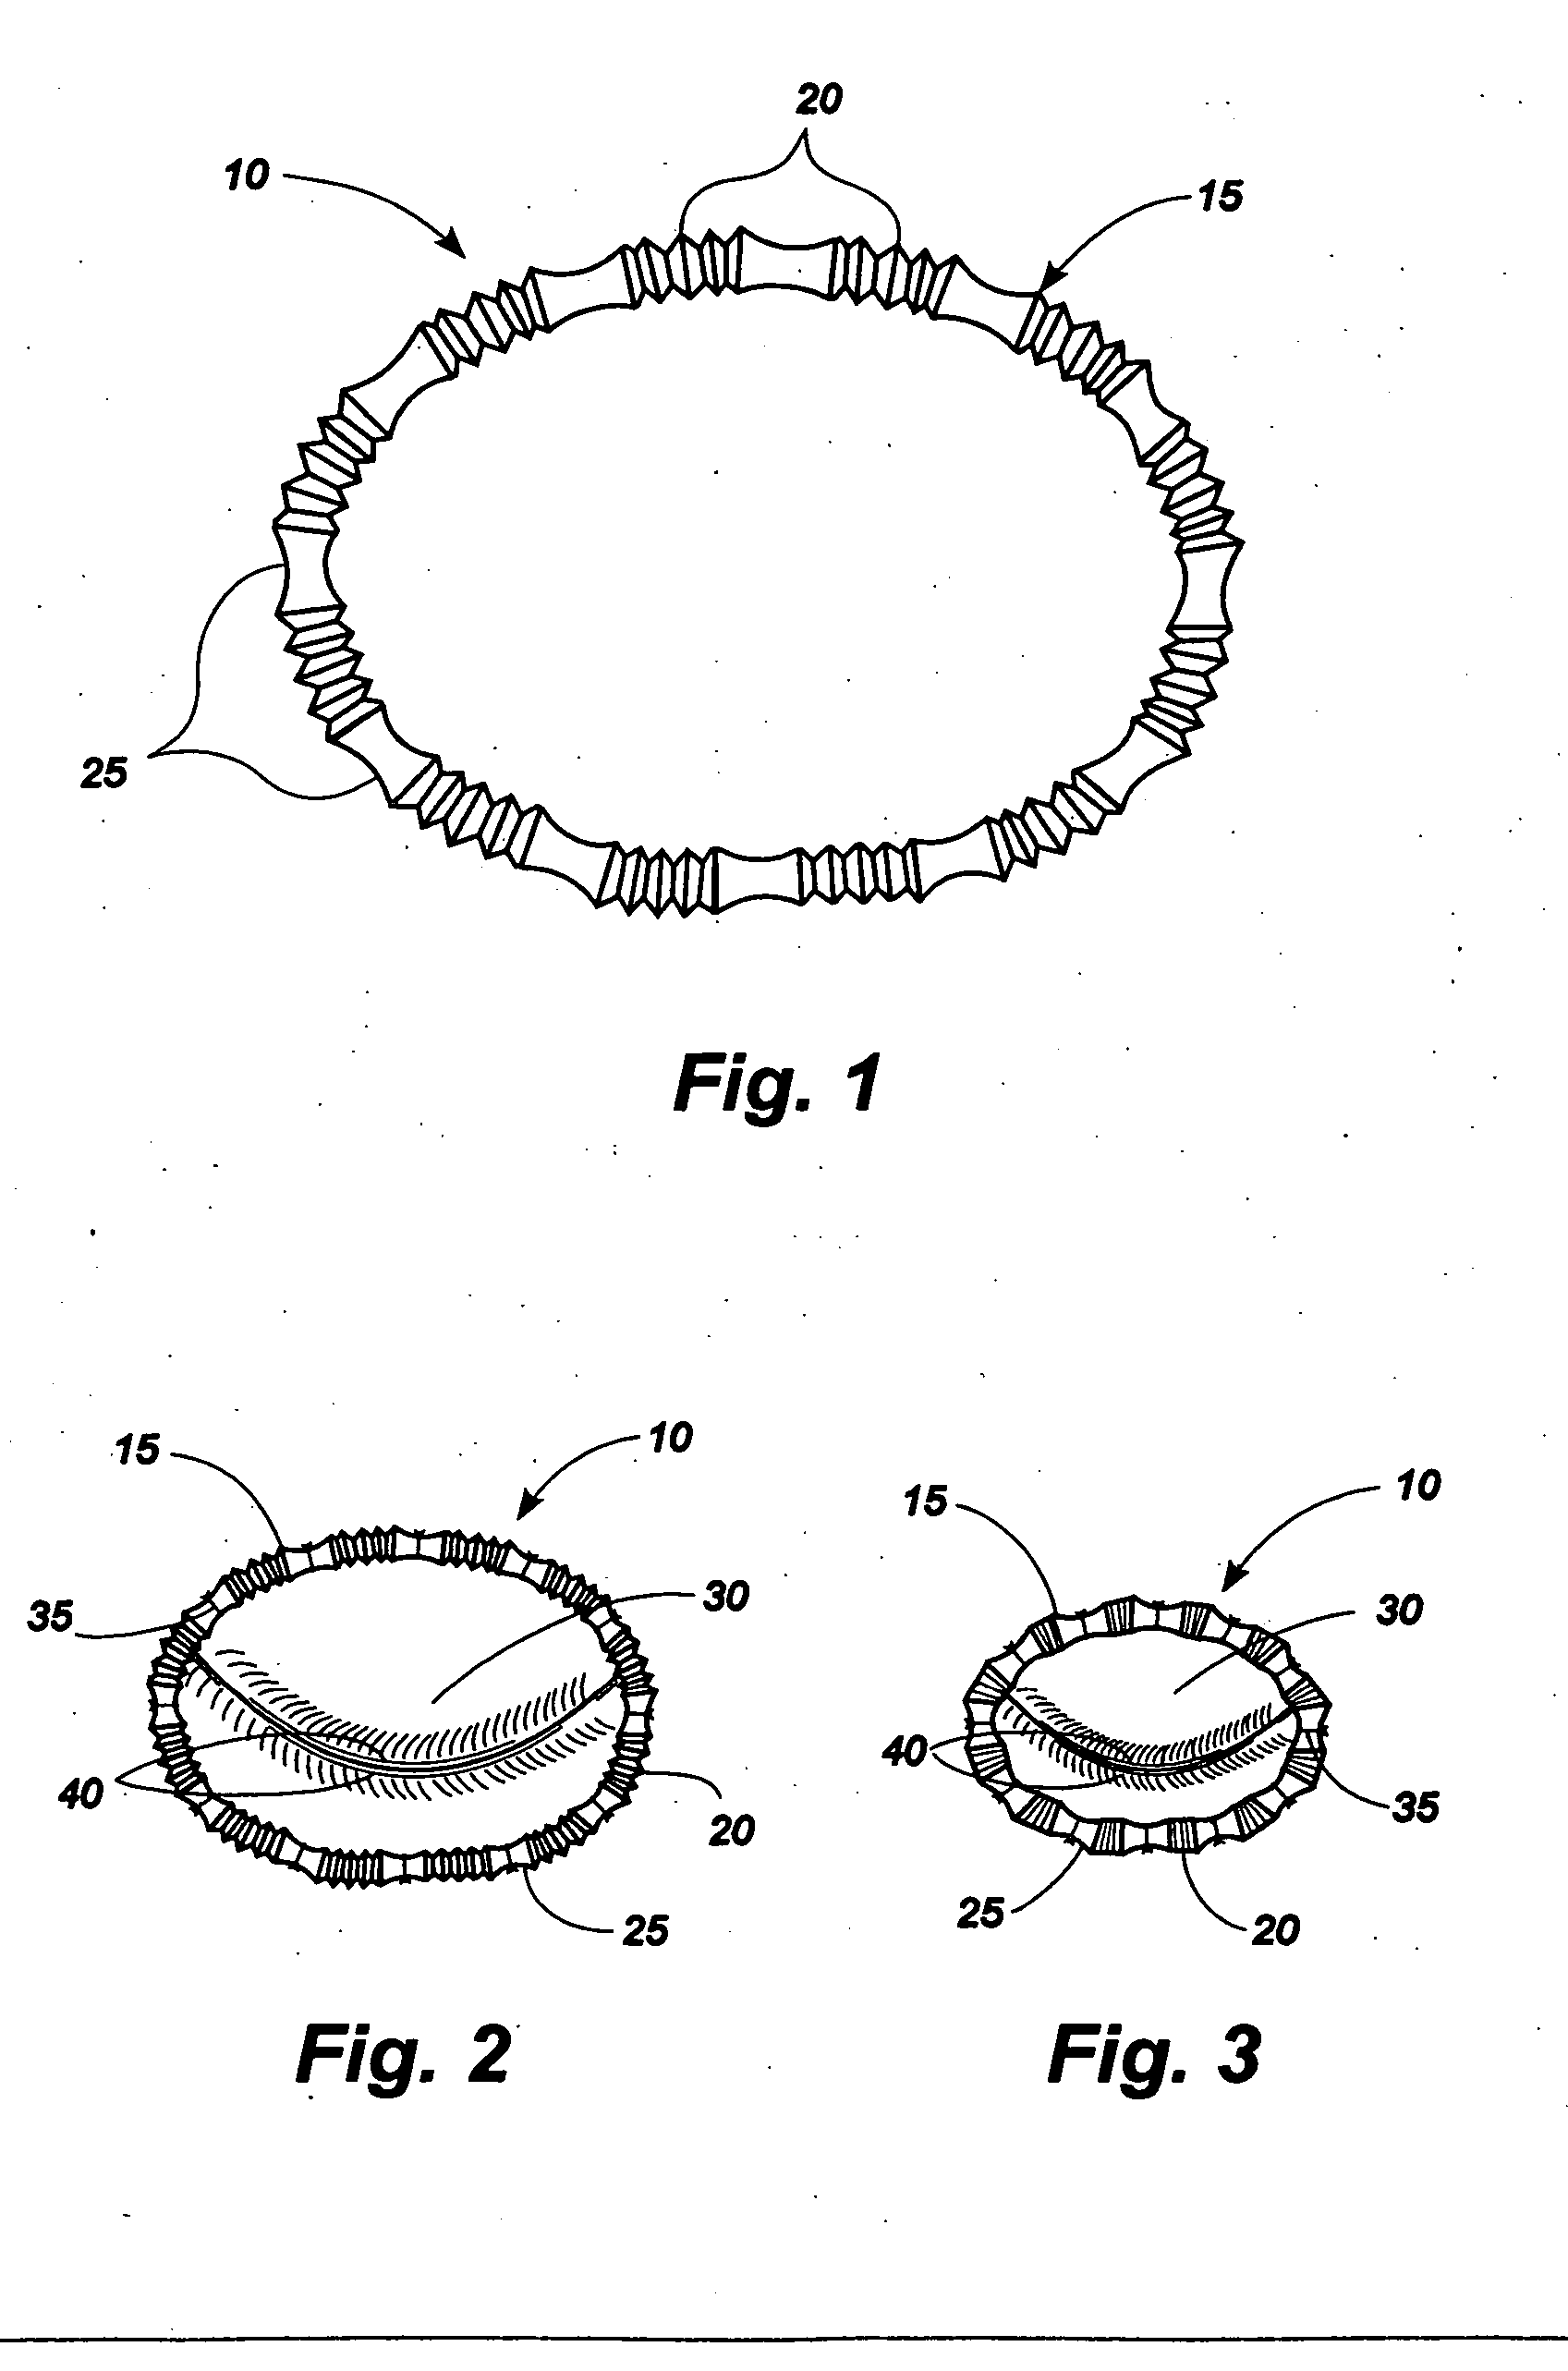 Methods and apparatus for controlling the internal circumference of an anatomic orifice or lumen